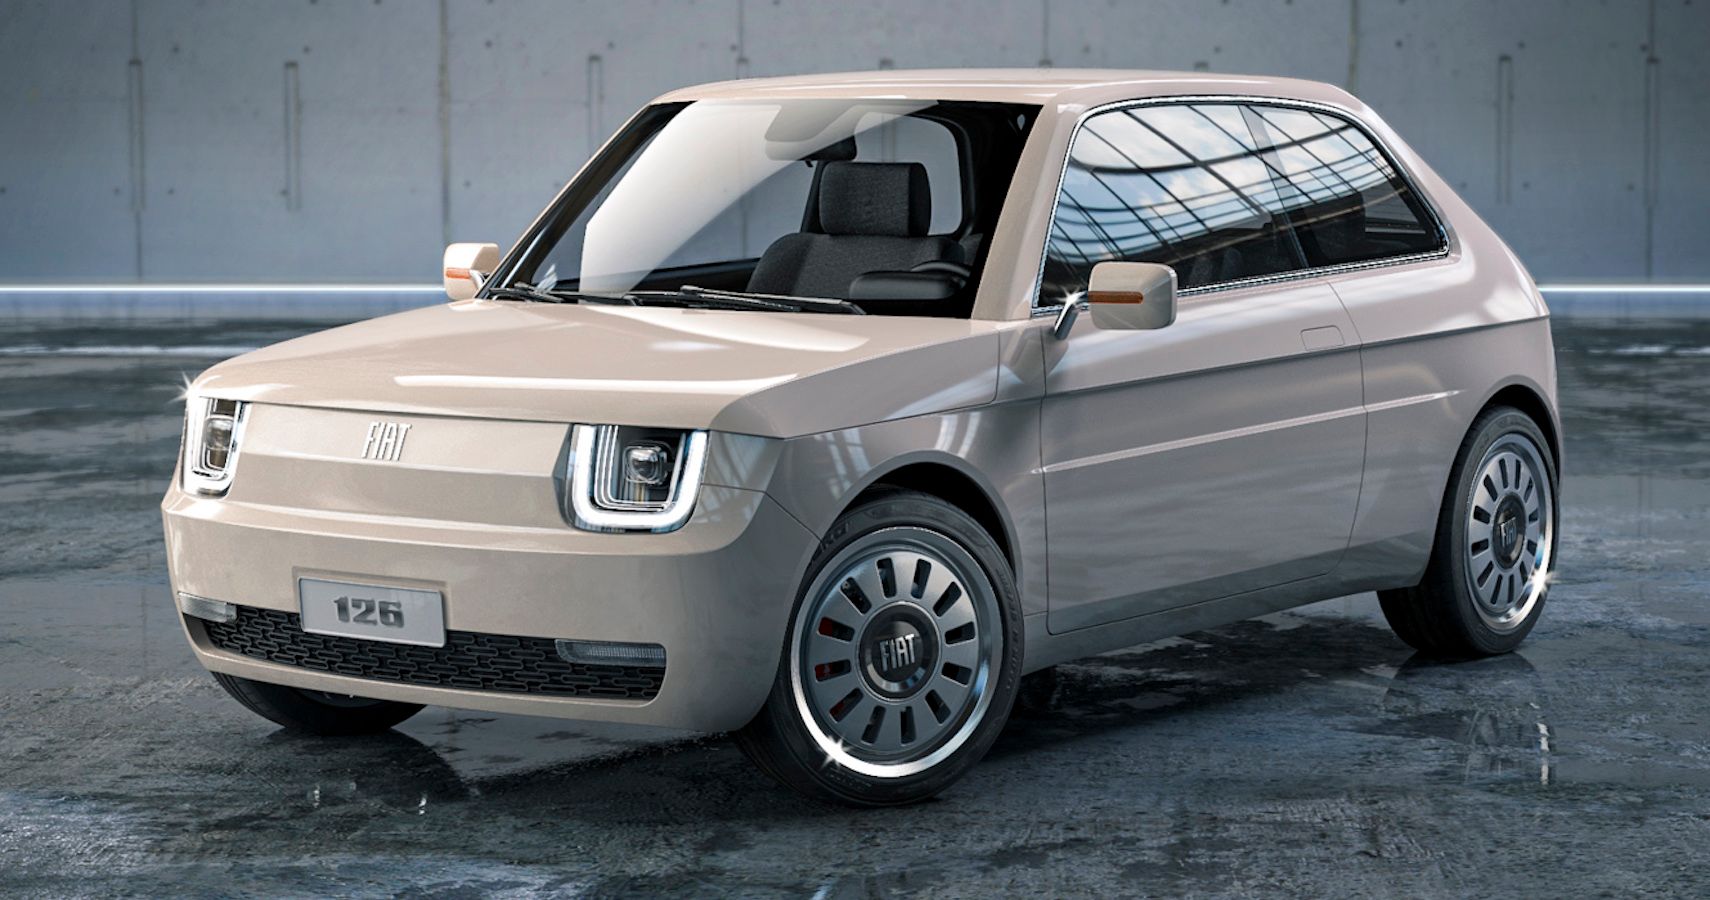 This Fiat 126 Electric Concept Rendered By MADE Studio